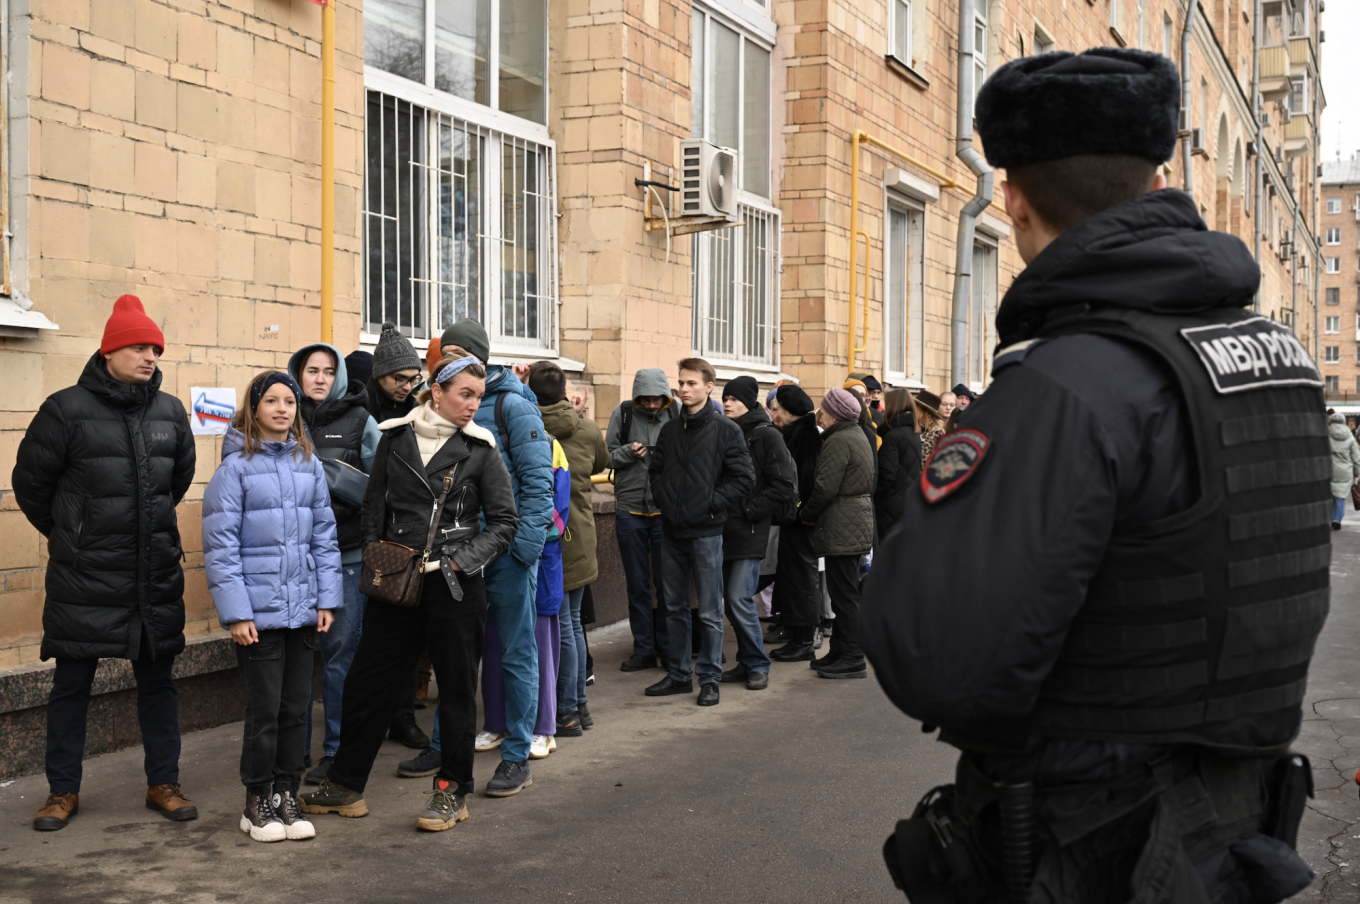 
					Russians line up to vote in Moscow.					 					NATALIA KOLESNIKOVA / AFP				